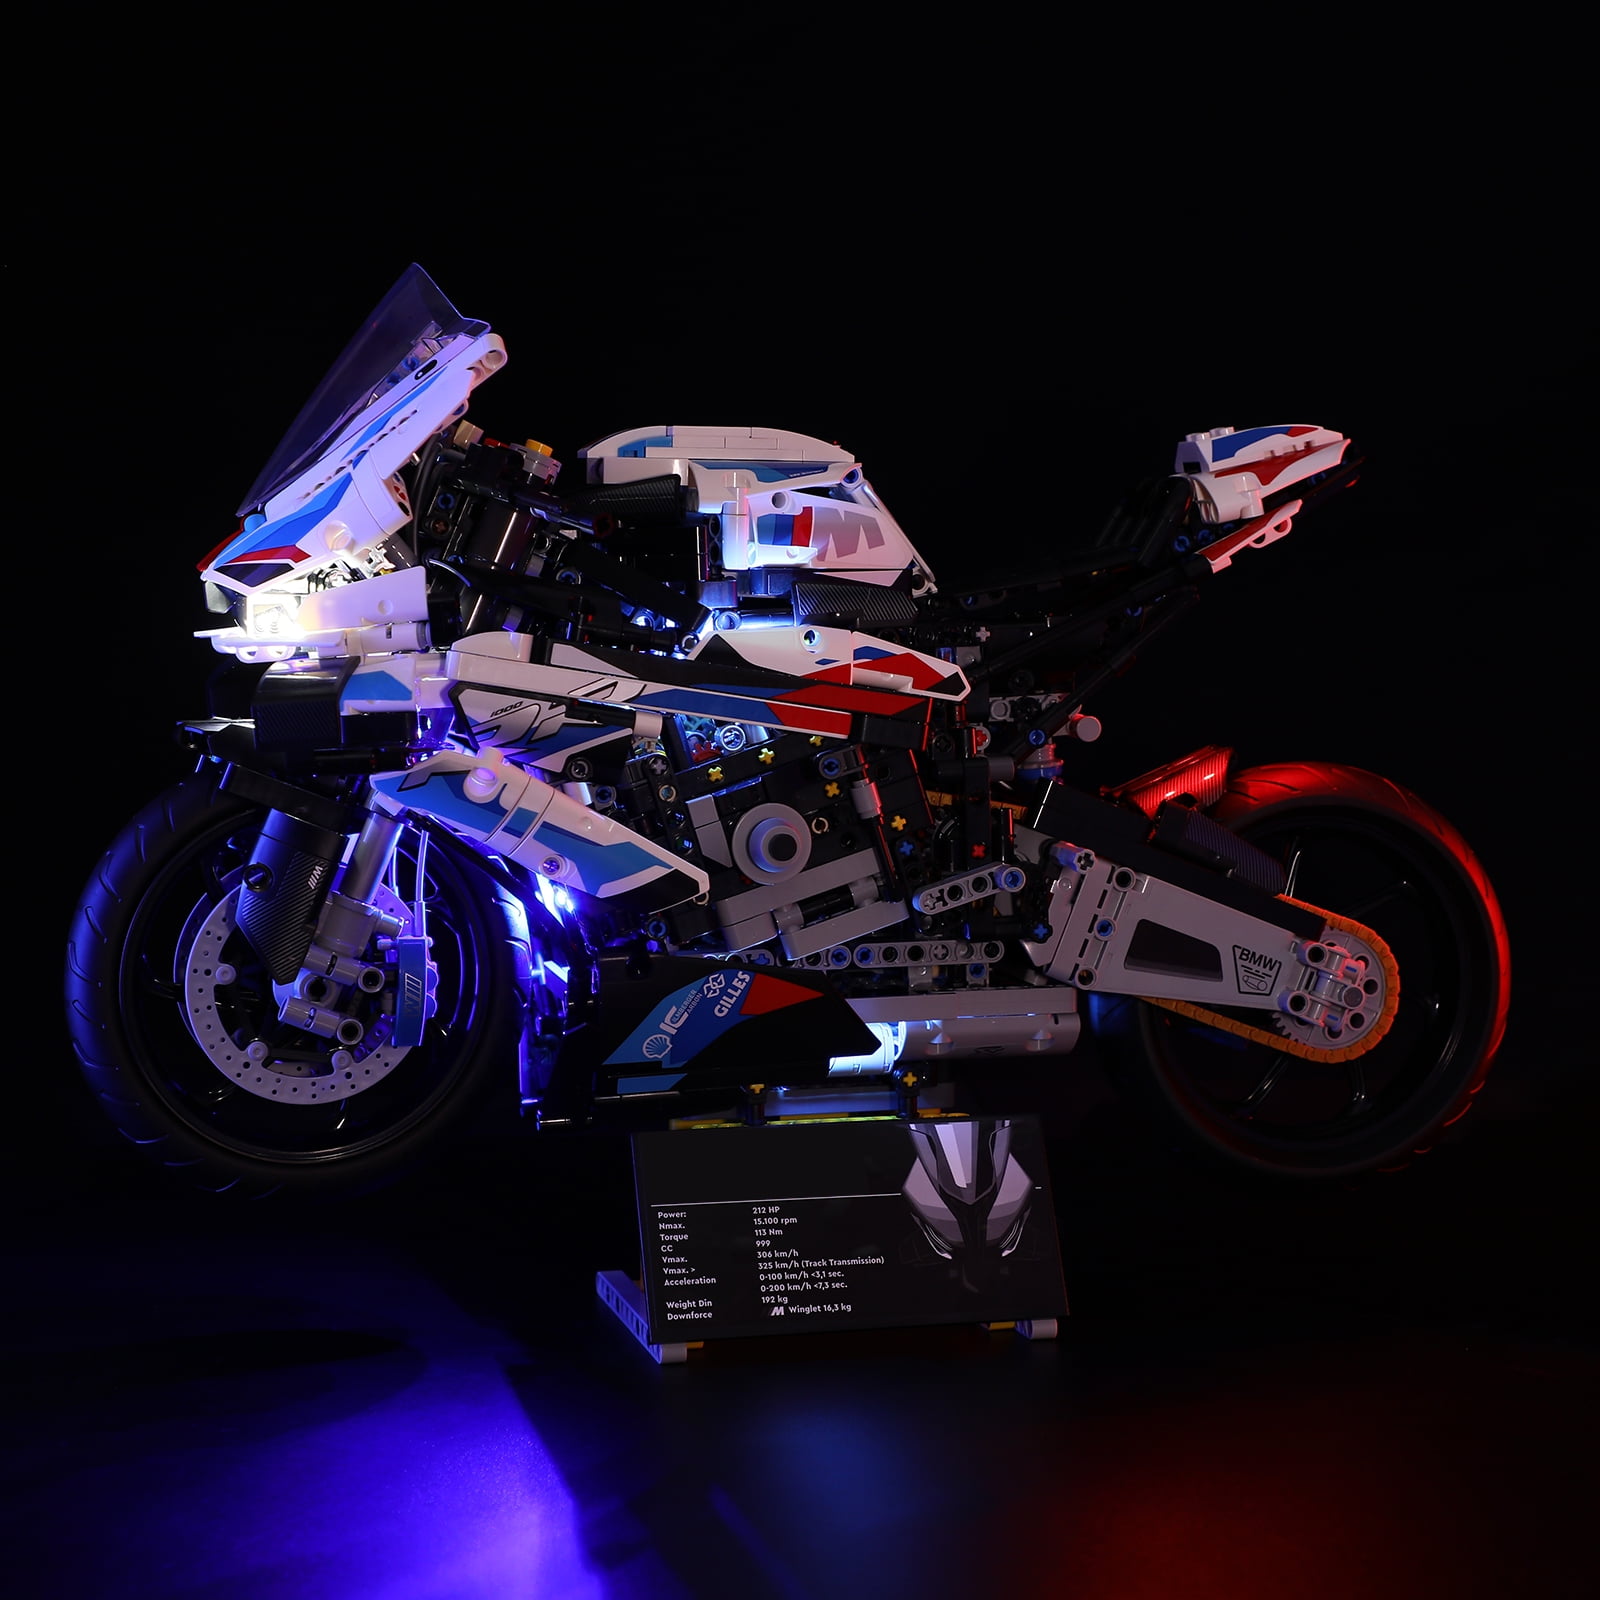 LEGO Technic BMW M 1000 RR 42130 Motorcycle Model Kit for Adults